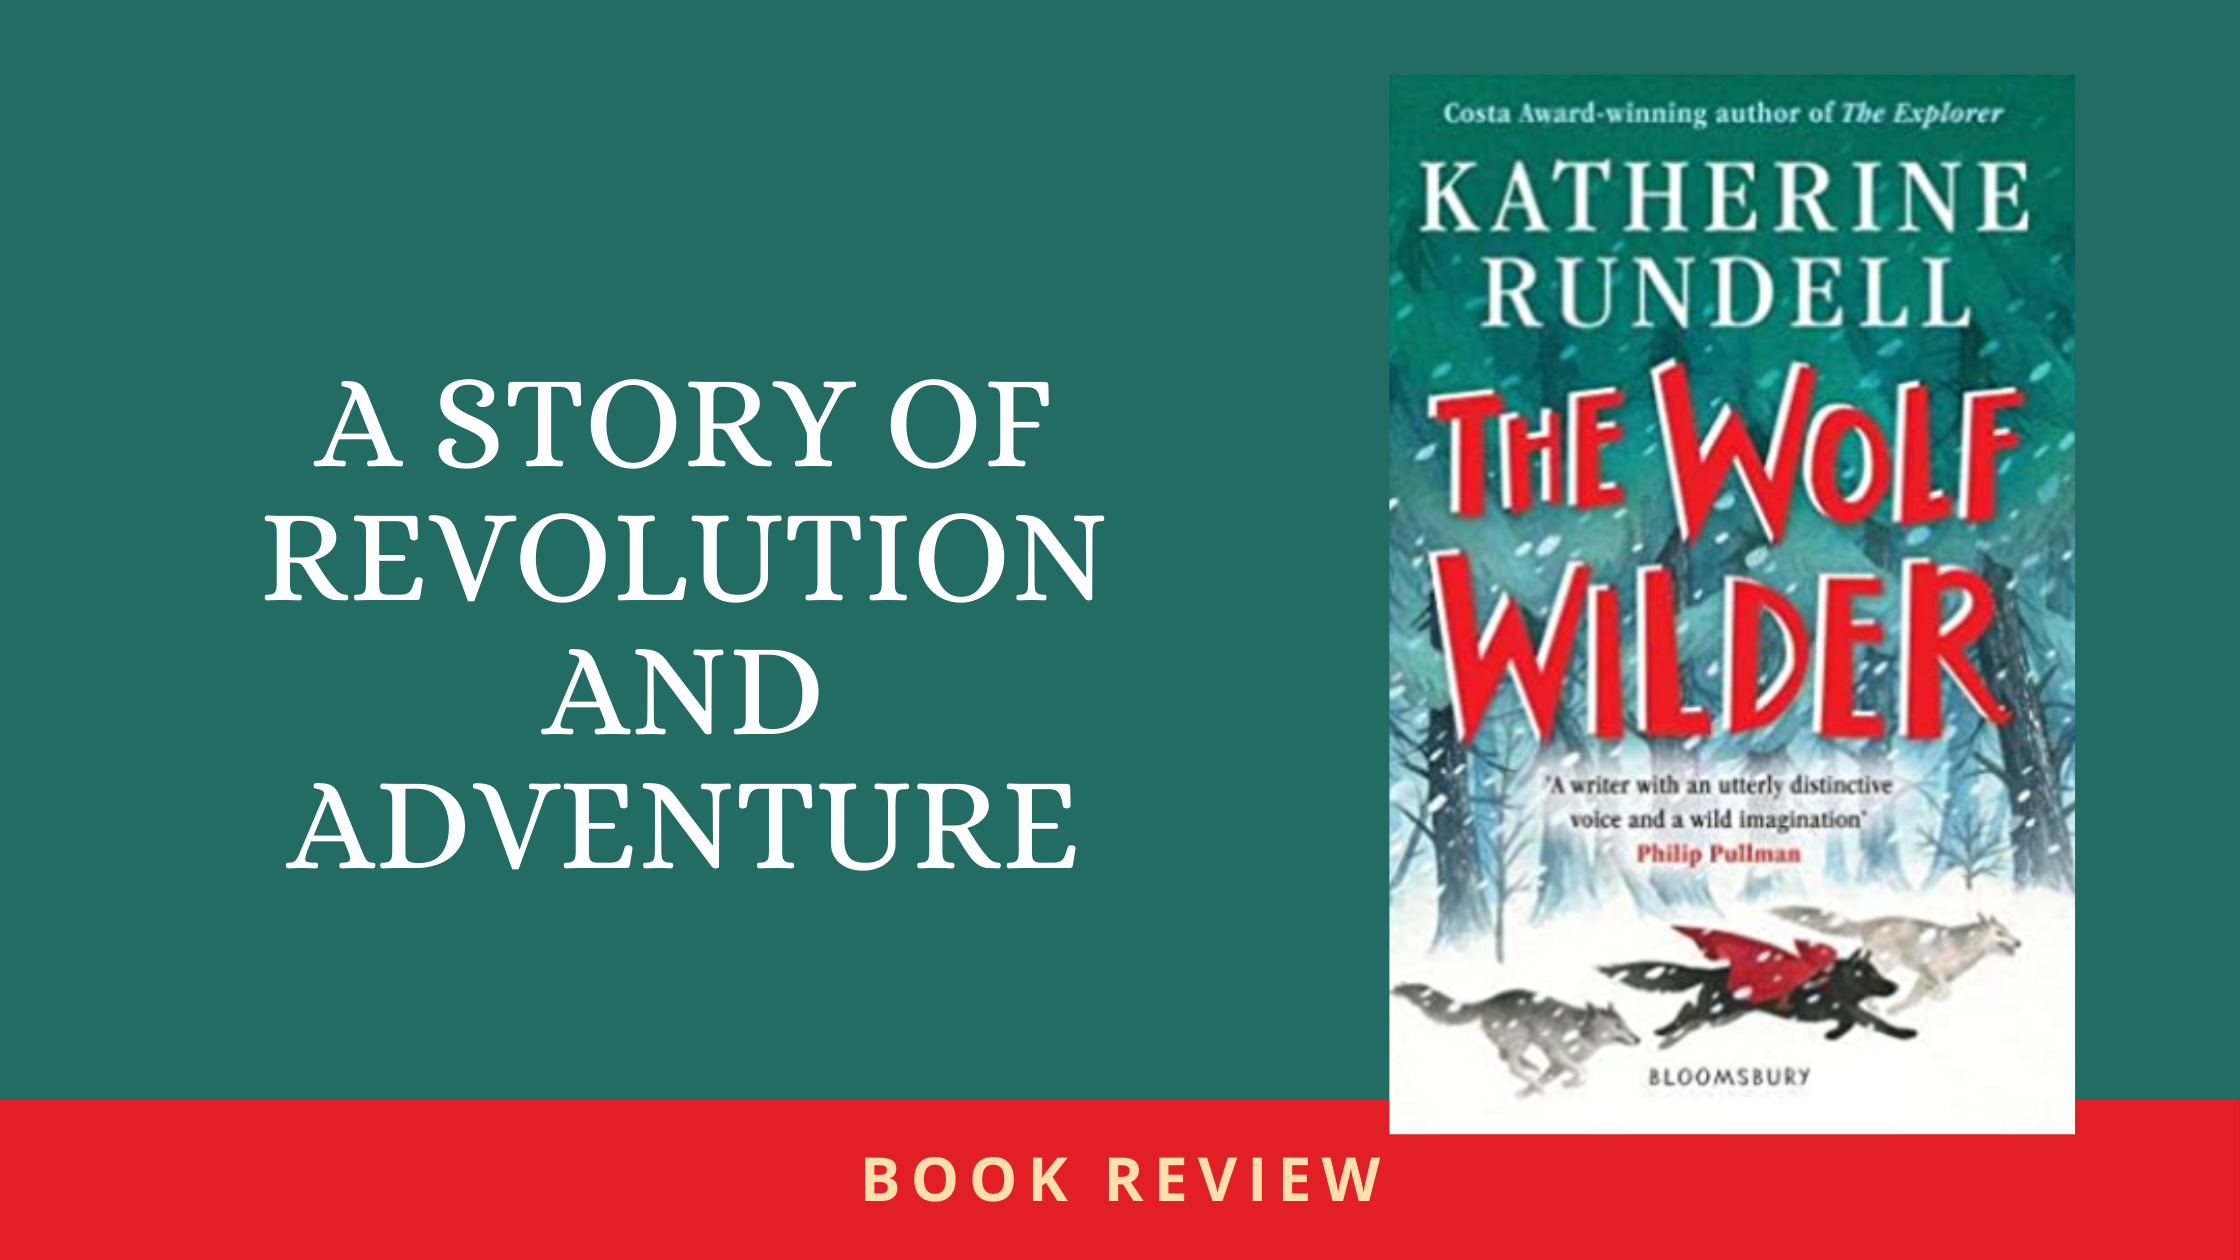 The Wolf Wilder - Book Review